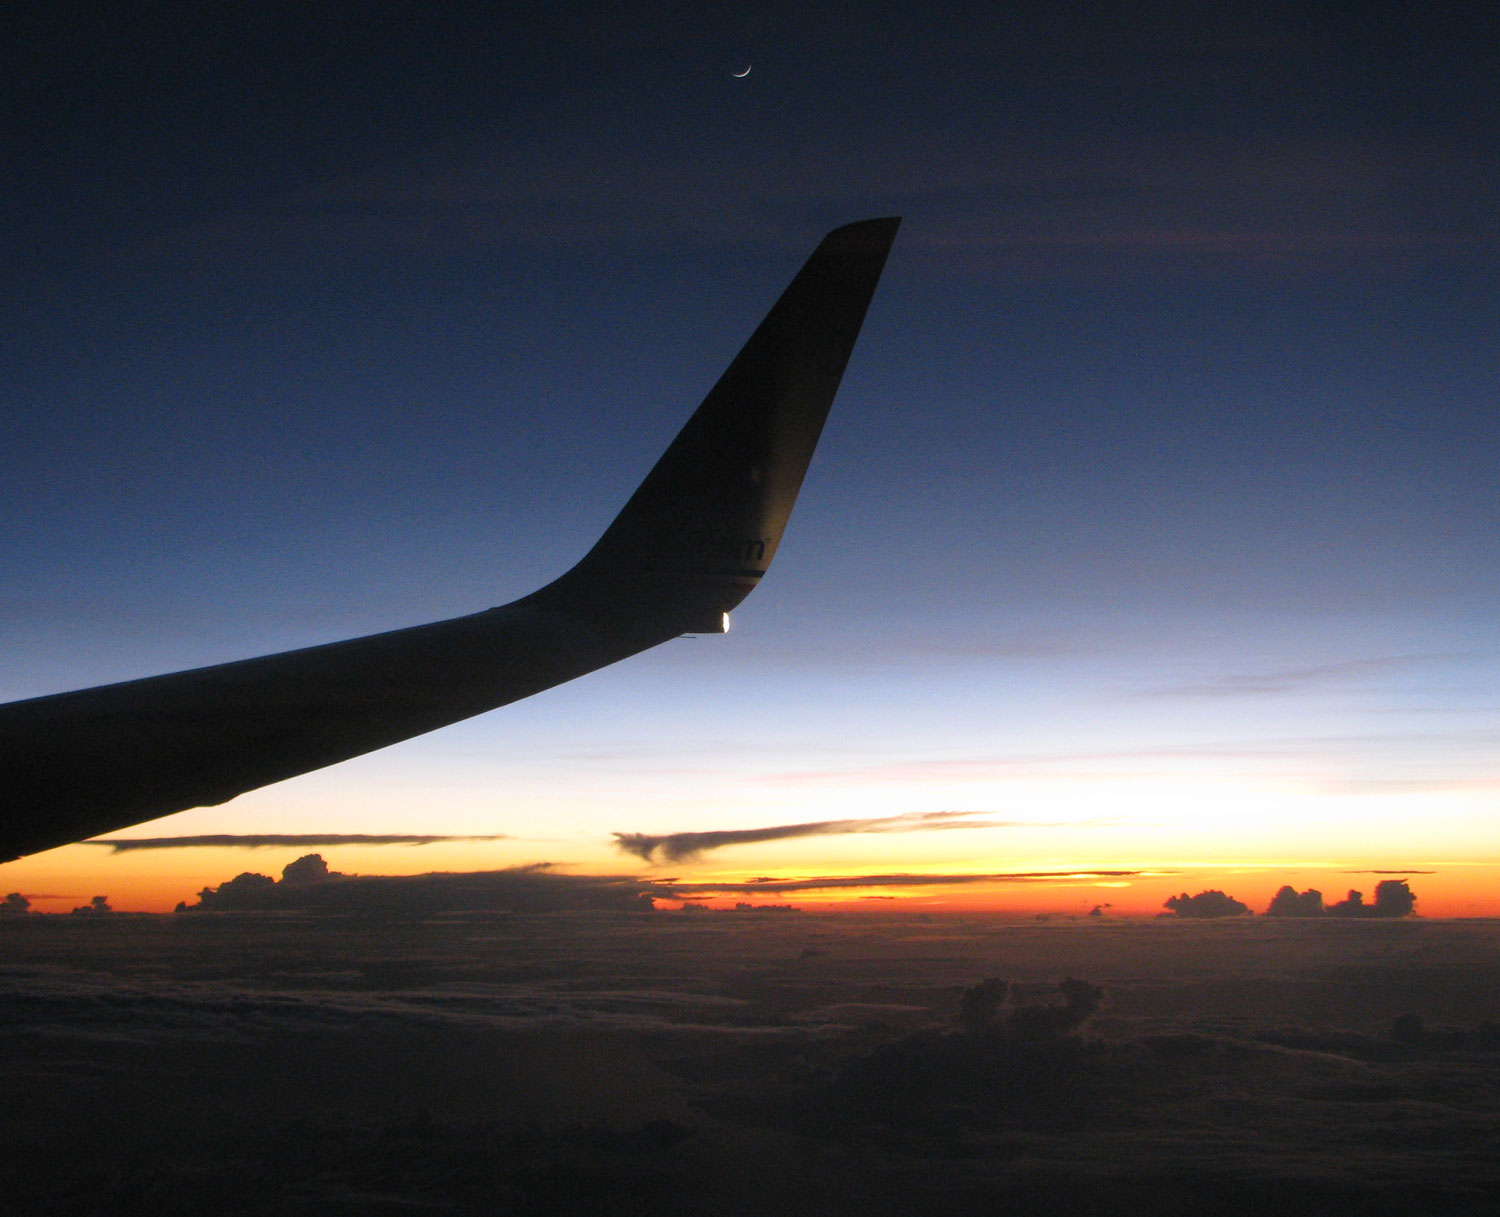 moon, airplane wing, and sunset sky